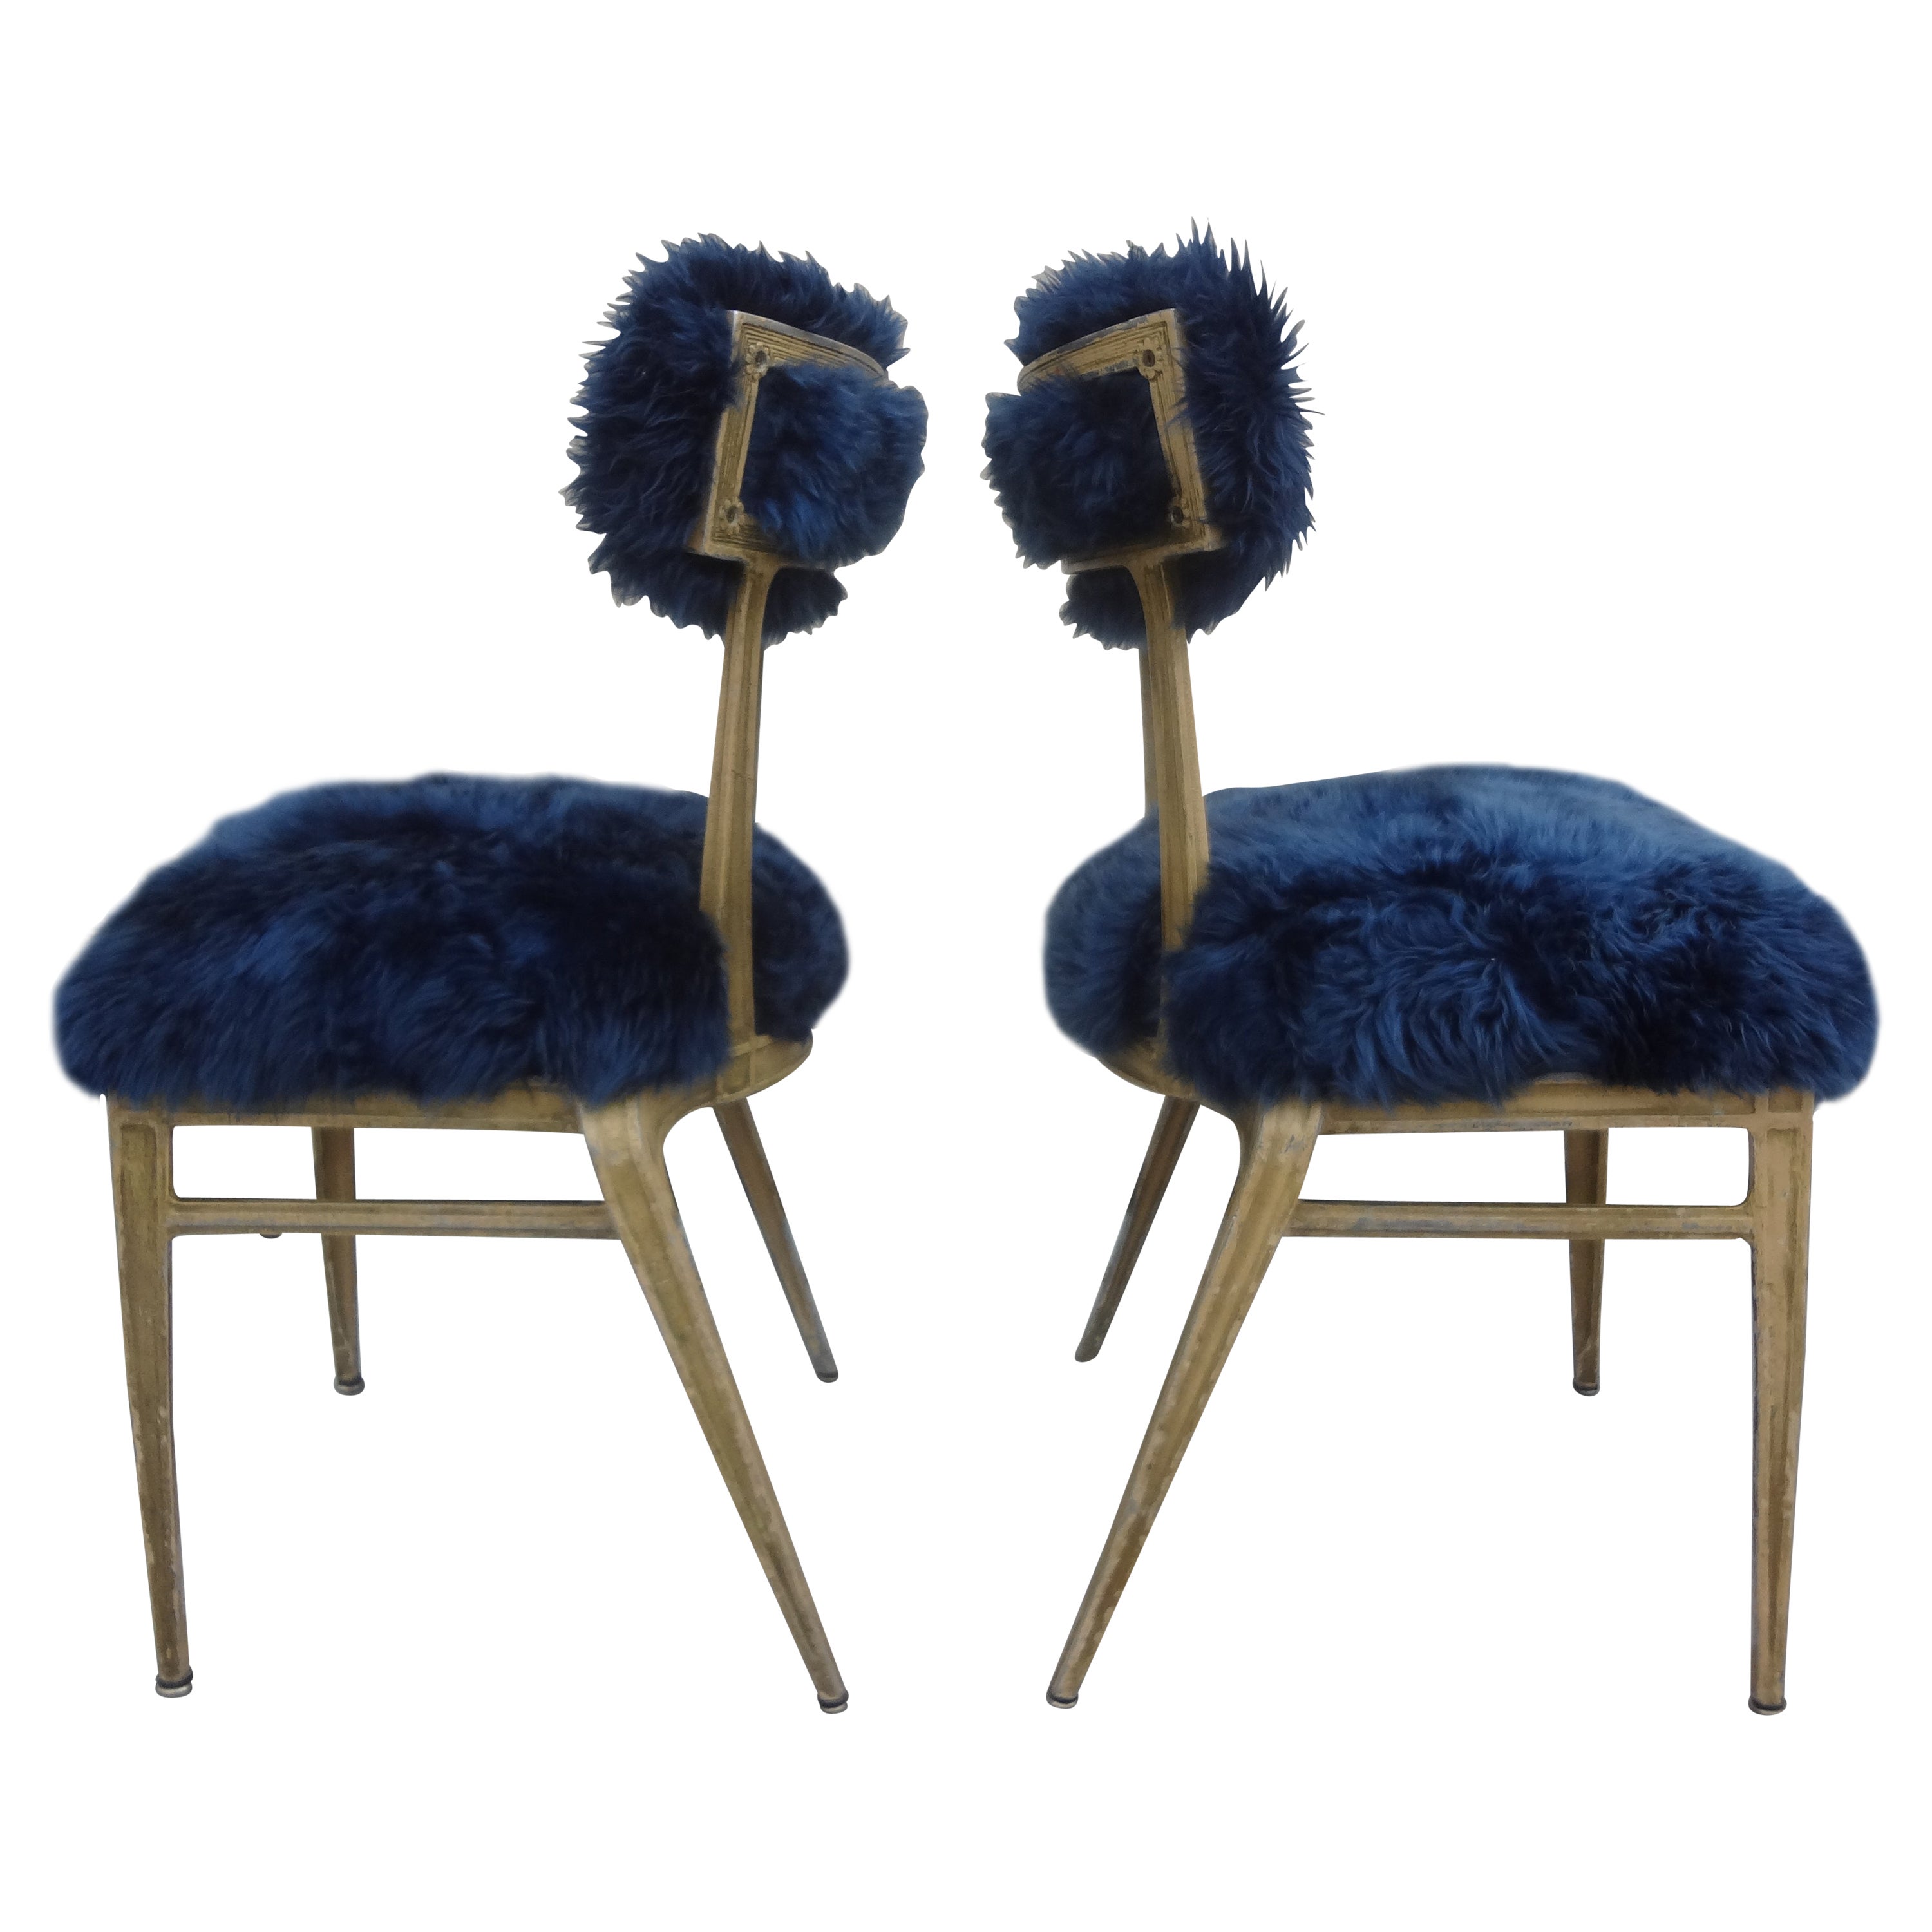 Pair of French Modern Jacques Adnet Style Metal Chairs Upholstered in Sheepskin